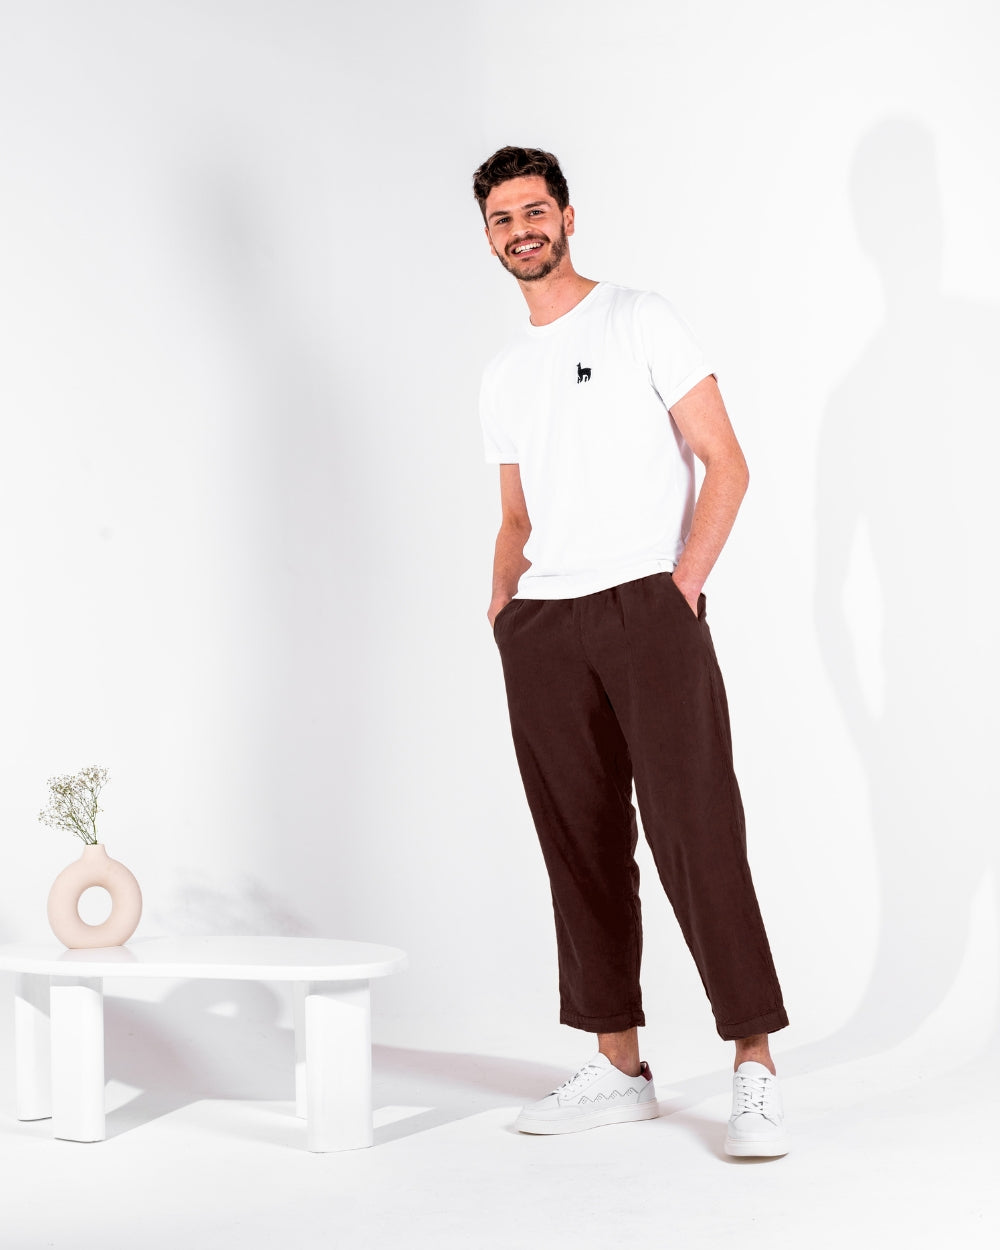 Lightweight linen and cotton pants perfect for summer